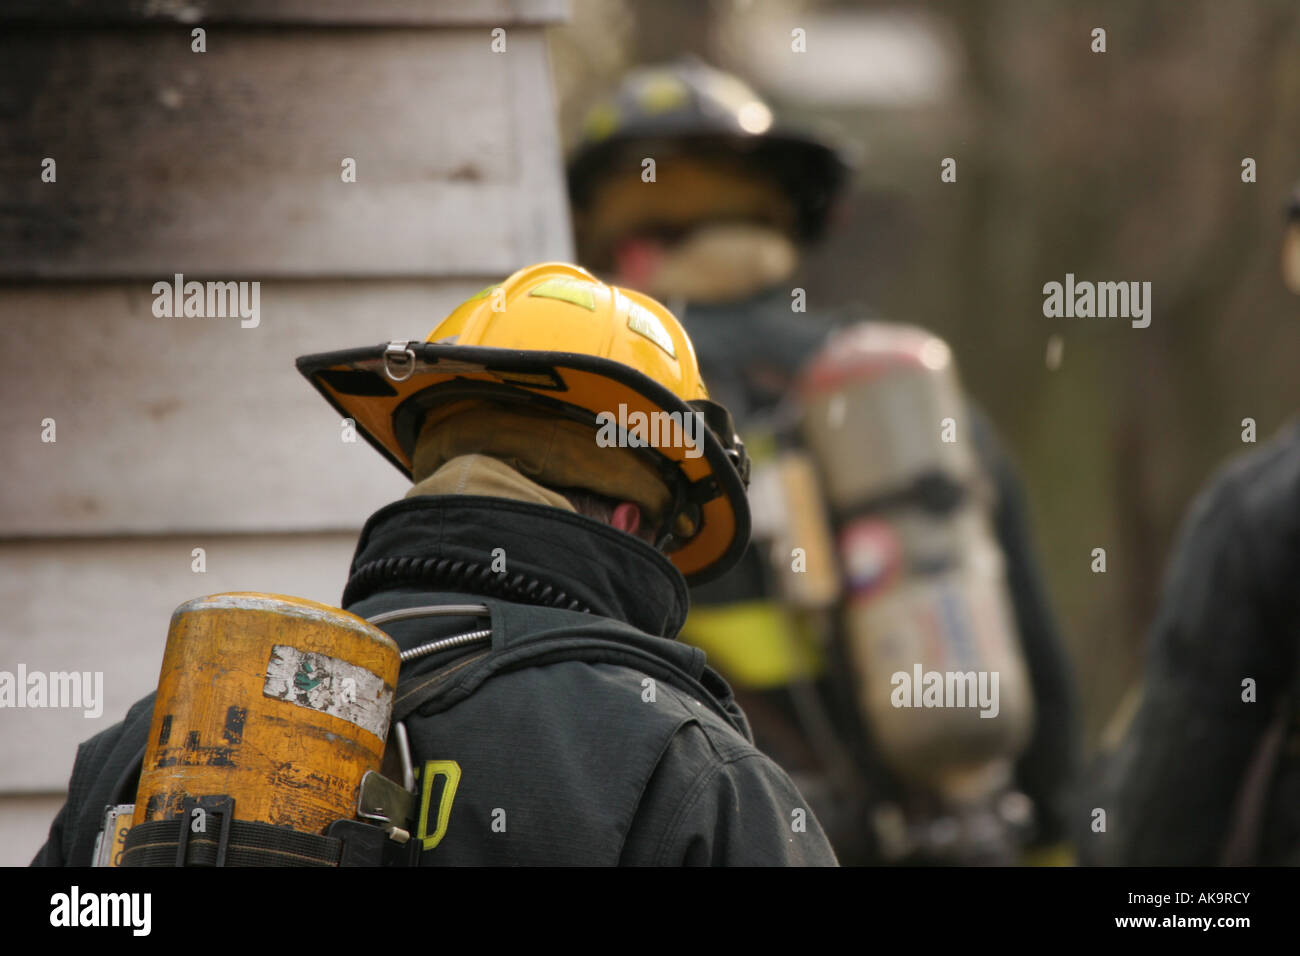 Three firefighters geared up at a house fire that has been extinguished Stock Photo